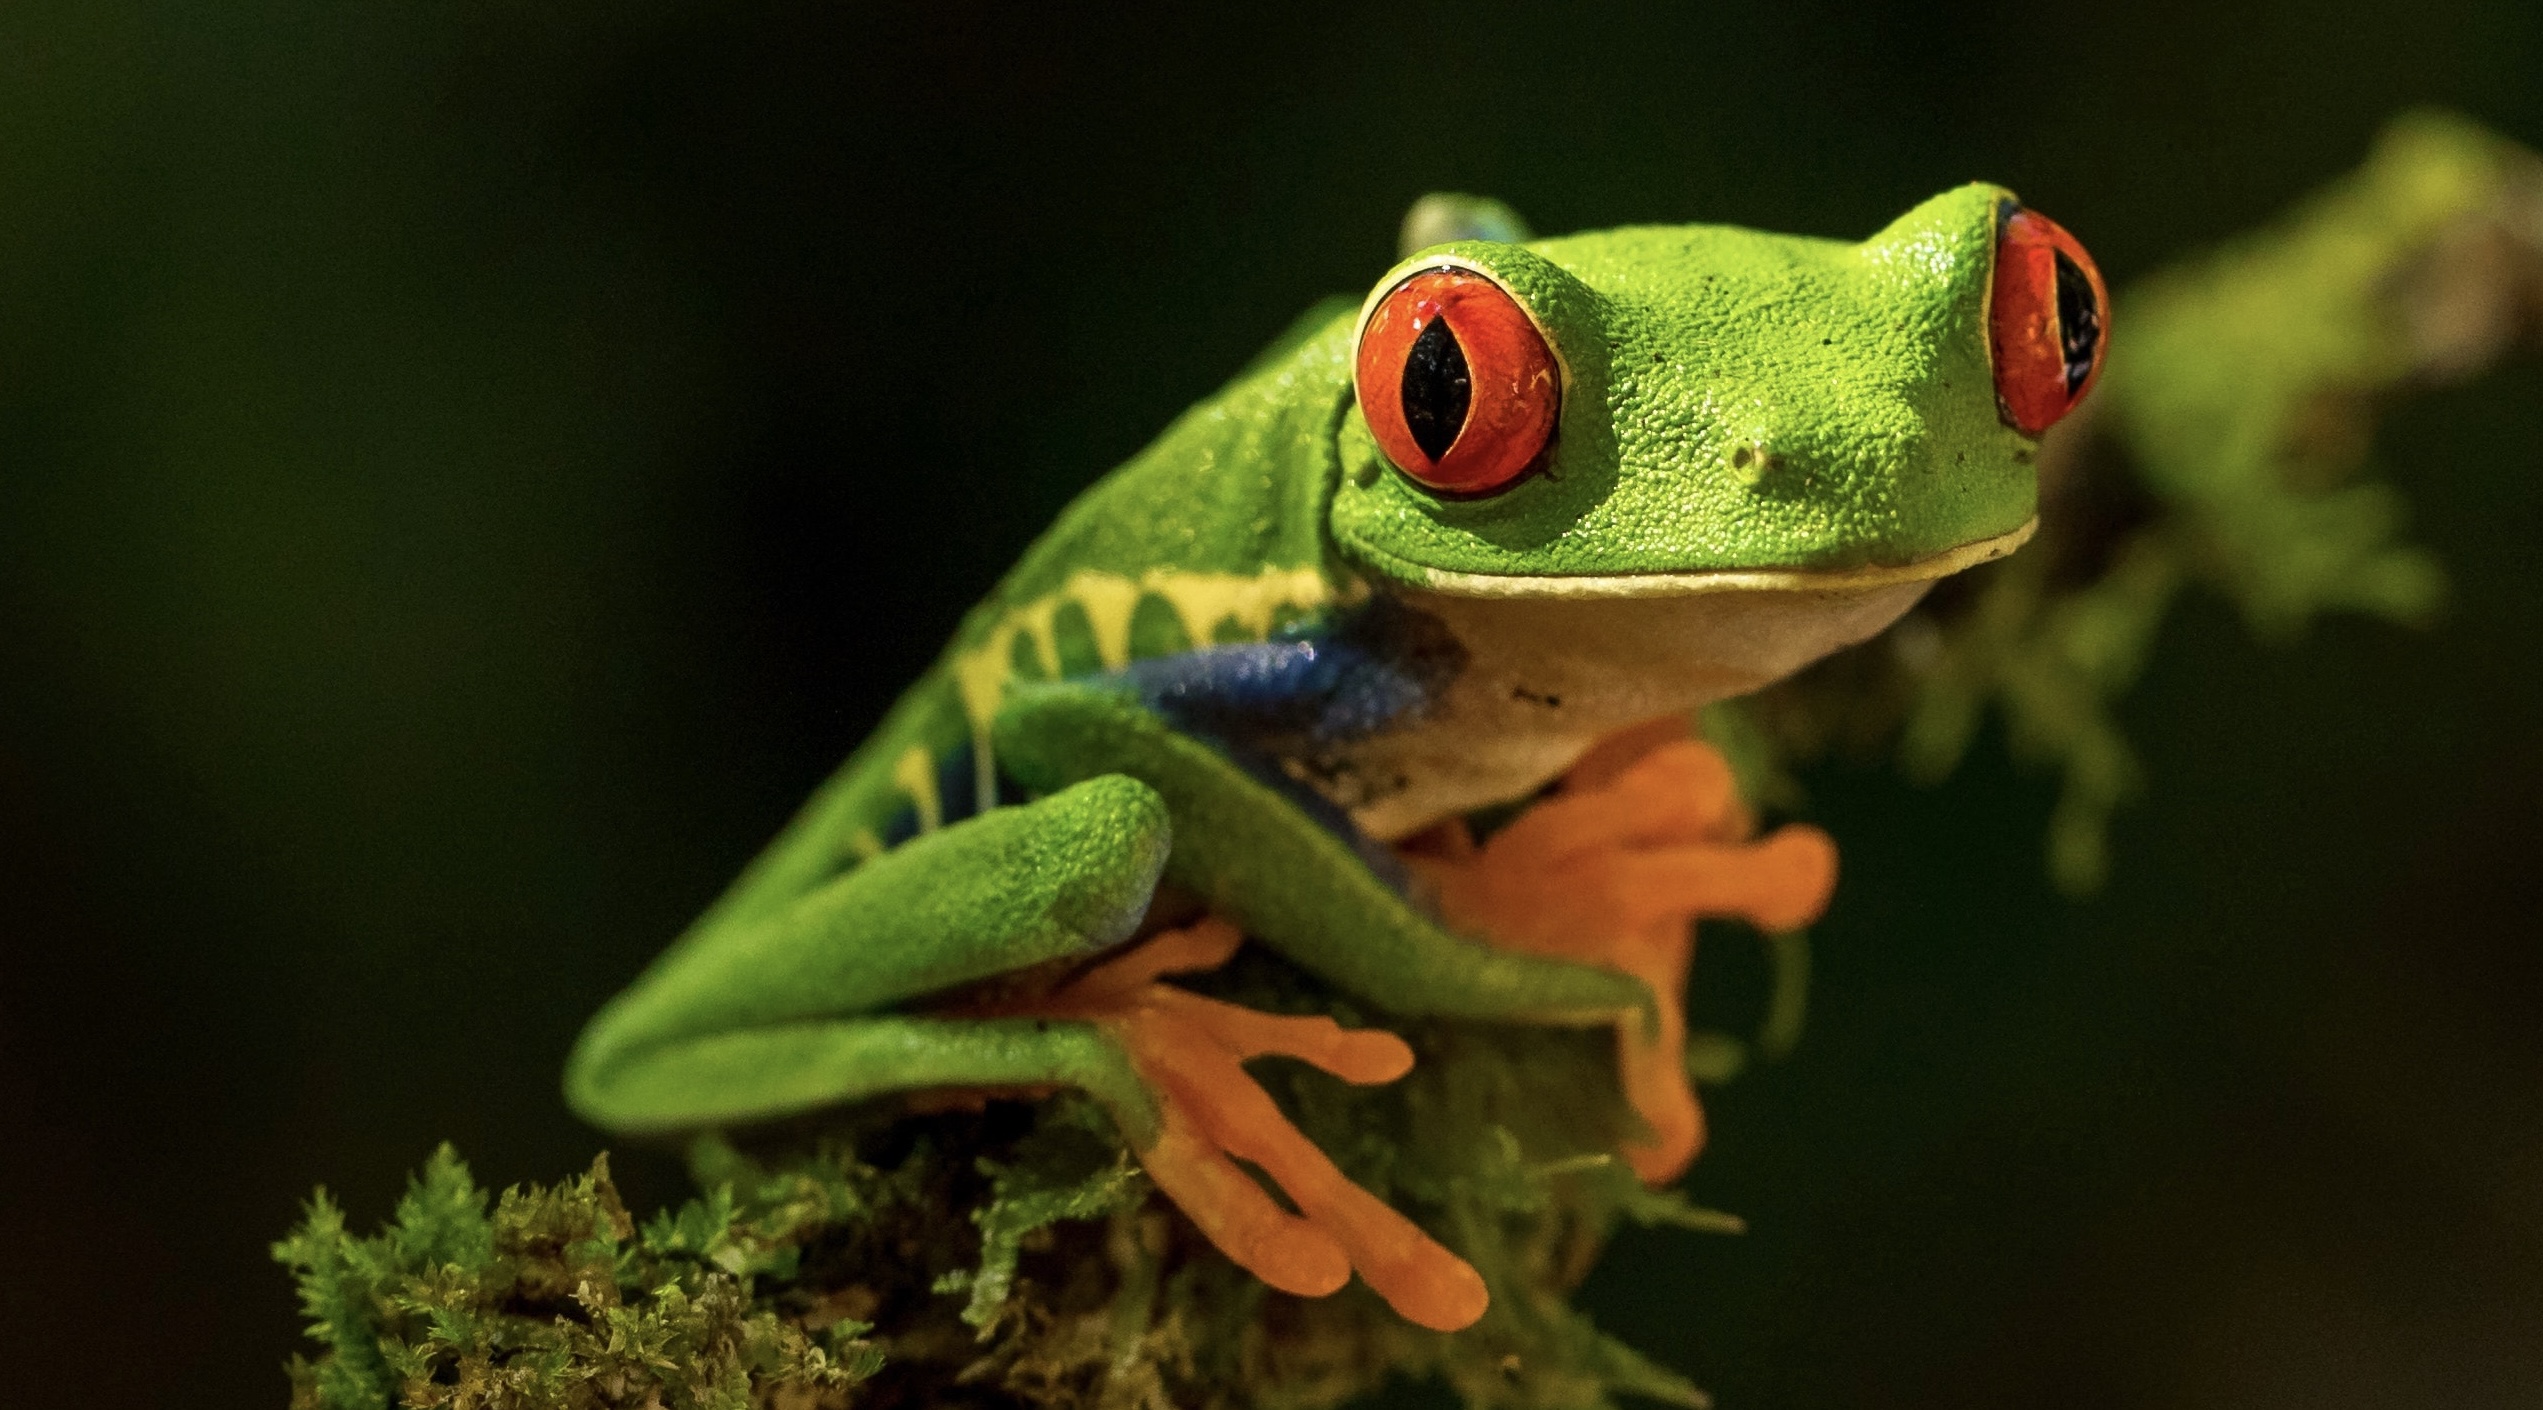 a vibrant green frog with fluorescent orange feet and large, piercing, red eyes perched on a moss covered tree branch